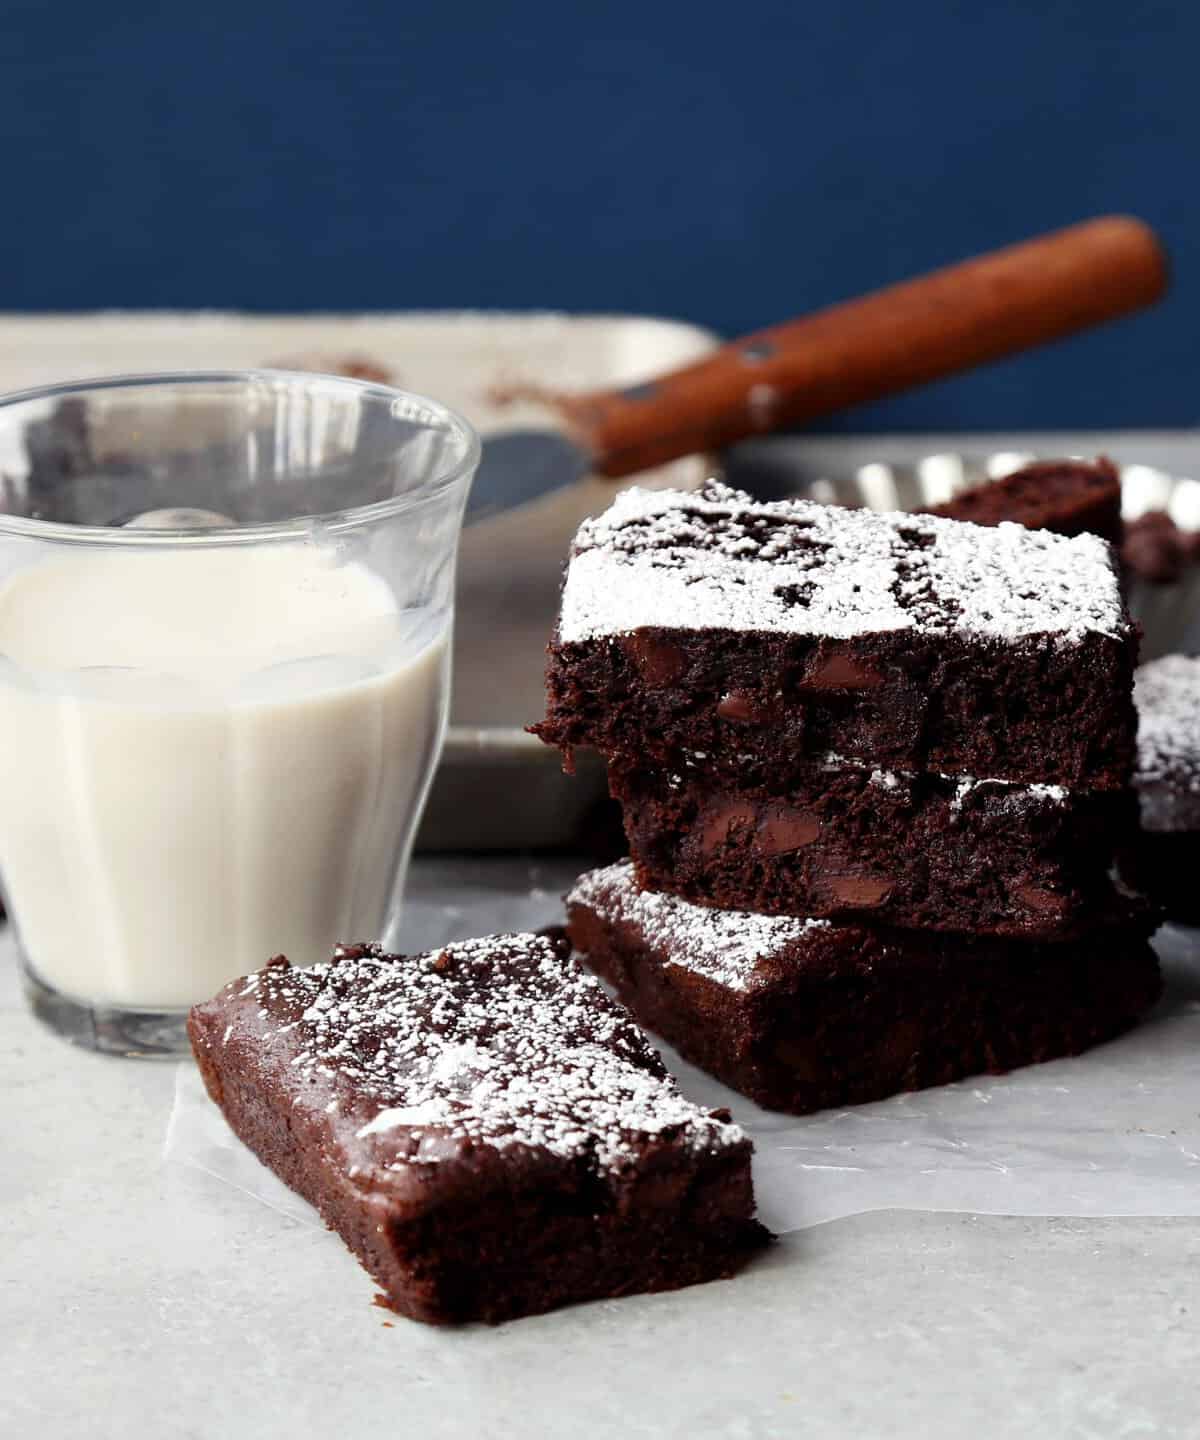  Dive into the chocolatey goodness of Mrs. Fields Authentic Brownies